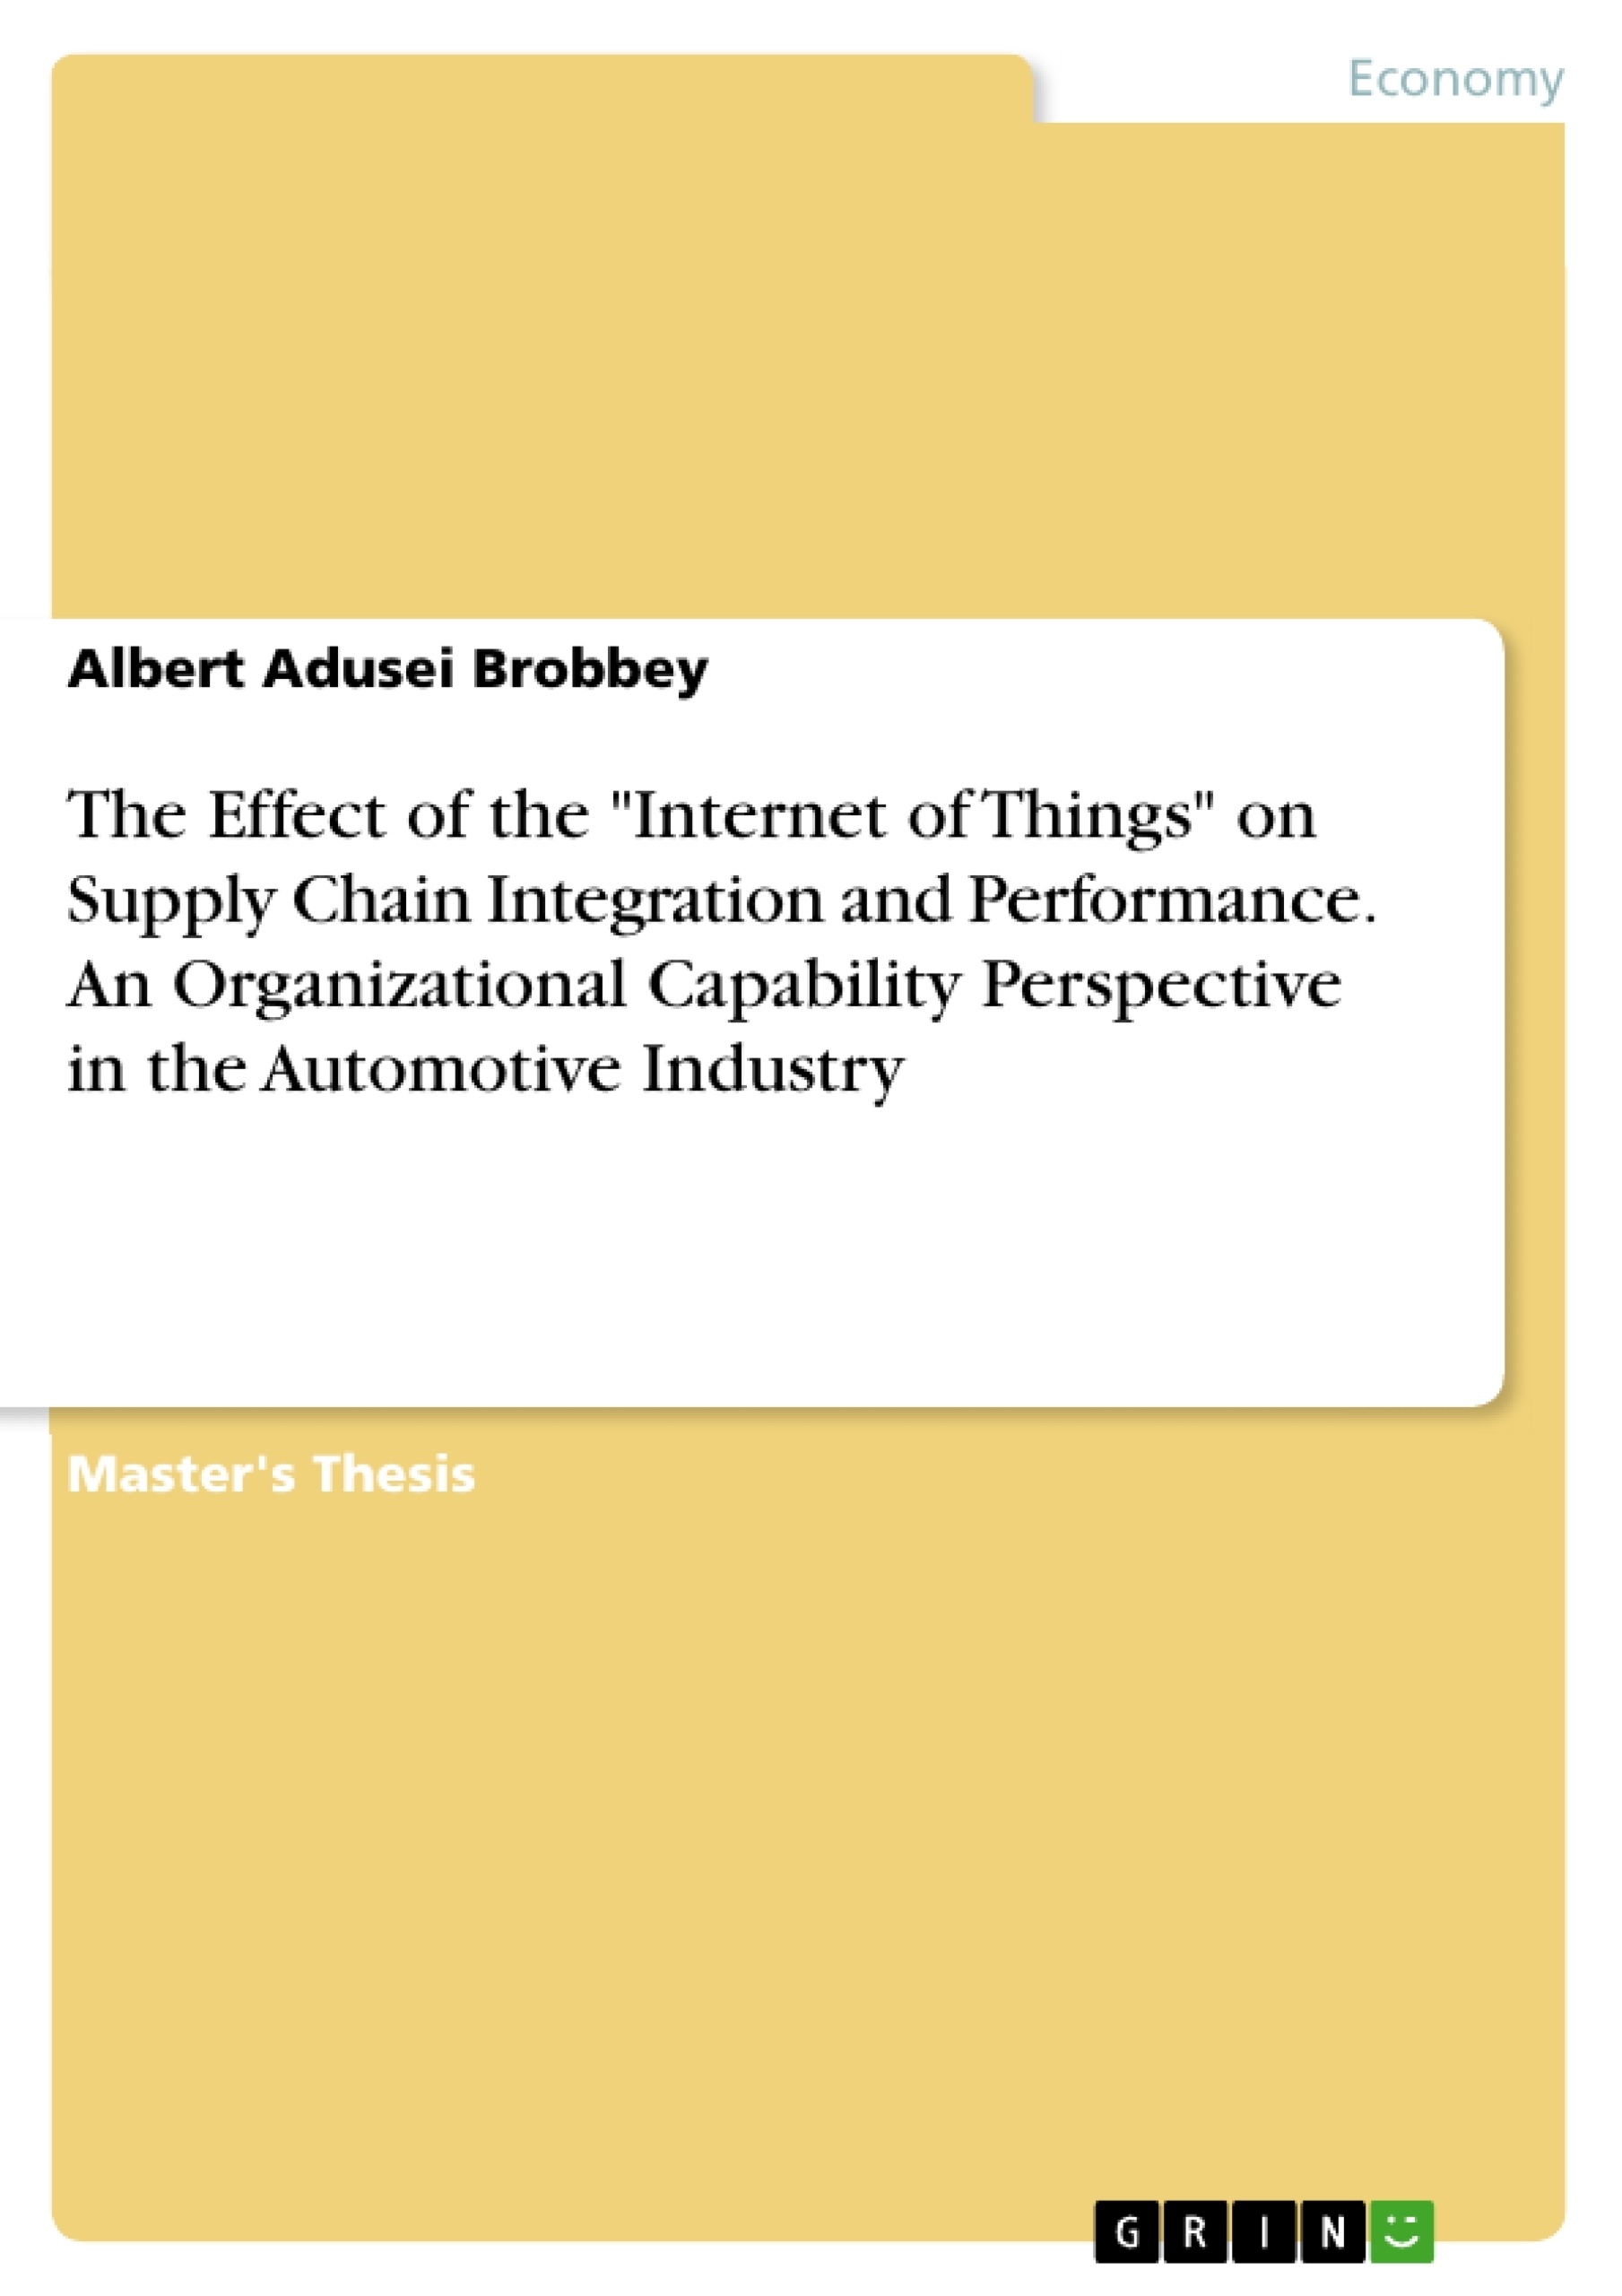 Title: The Effect of the "Internet of Things" on Supply Chain Integration and Performance. An Organizational Capability Perspective in the Automotive Industry